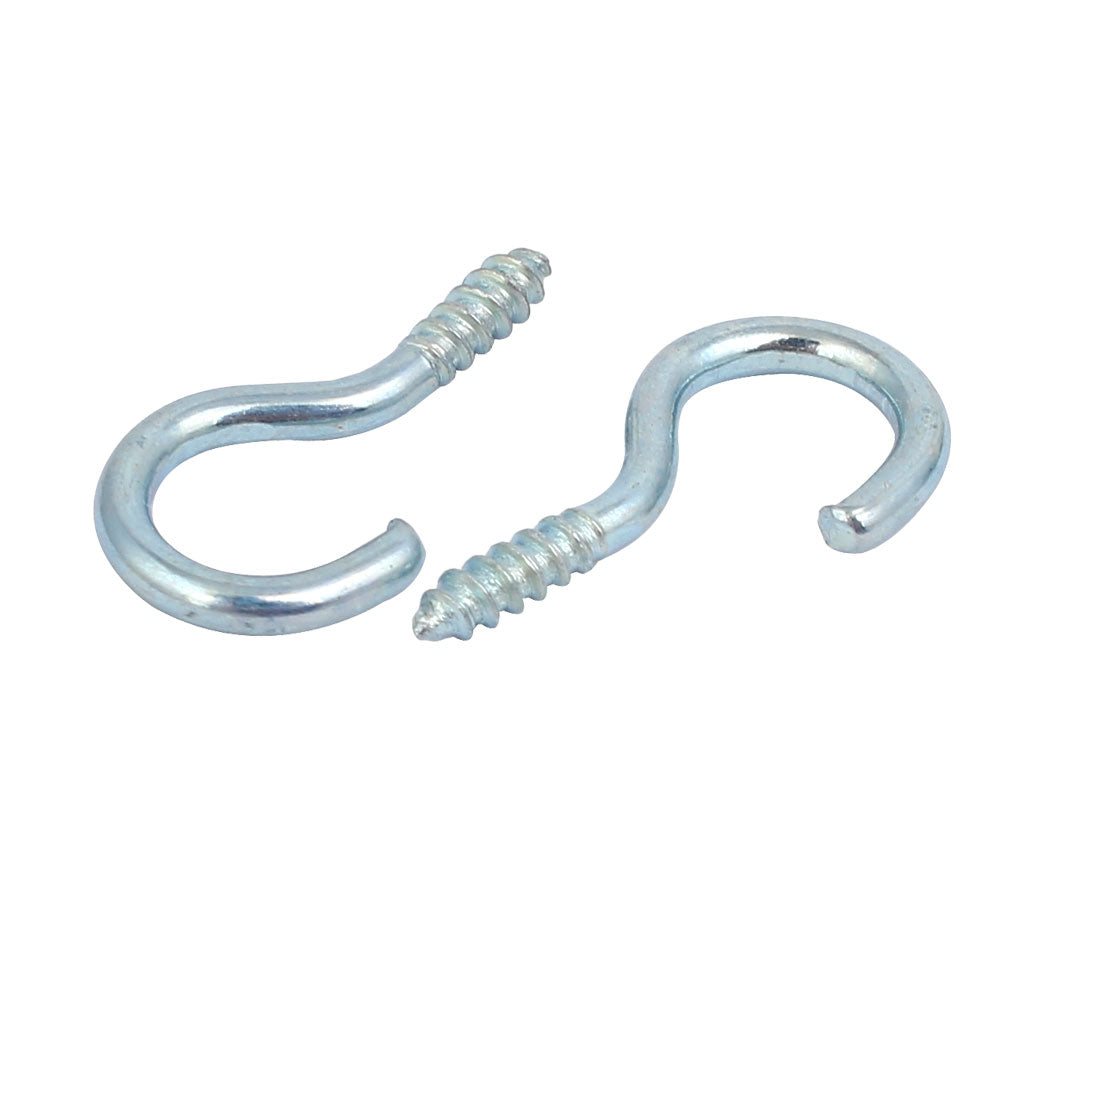 uxcell Uxcell 2.2mm Dia Thread 20mm Length Iron Zinc Plated Self-Tapping Eye Screw Hook 50pcs